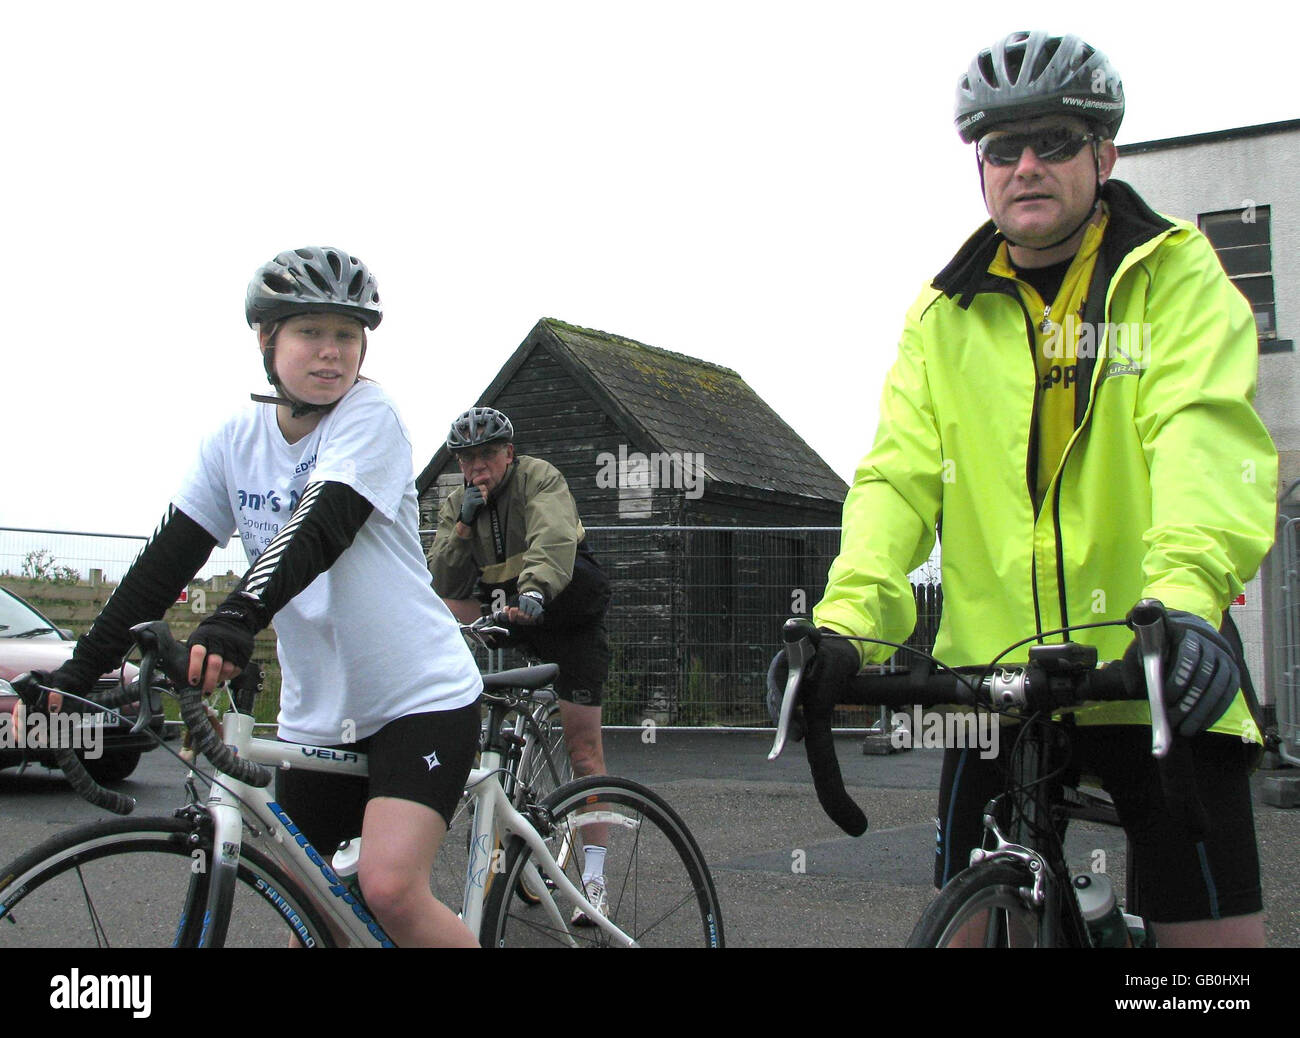 Mike Tomlinson and daughter Rebecca, the husband and daughter of charity campaigner Jane Tomlinson, at John O'Groats in the north of Scotland as they prepare to cycle the length of Britain to Land's End. Stock Photo